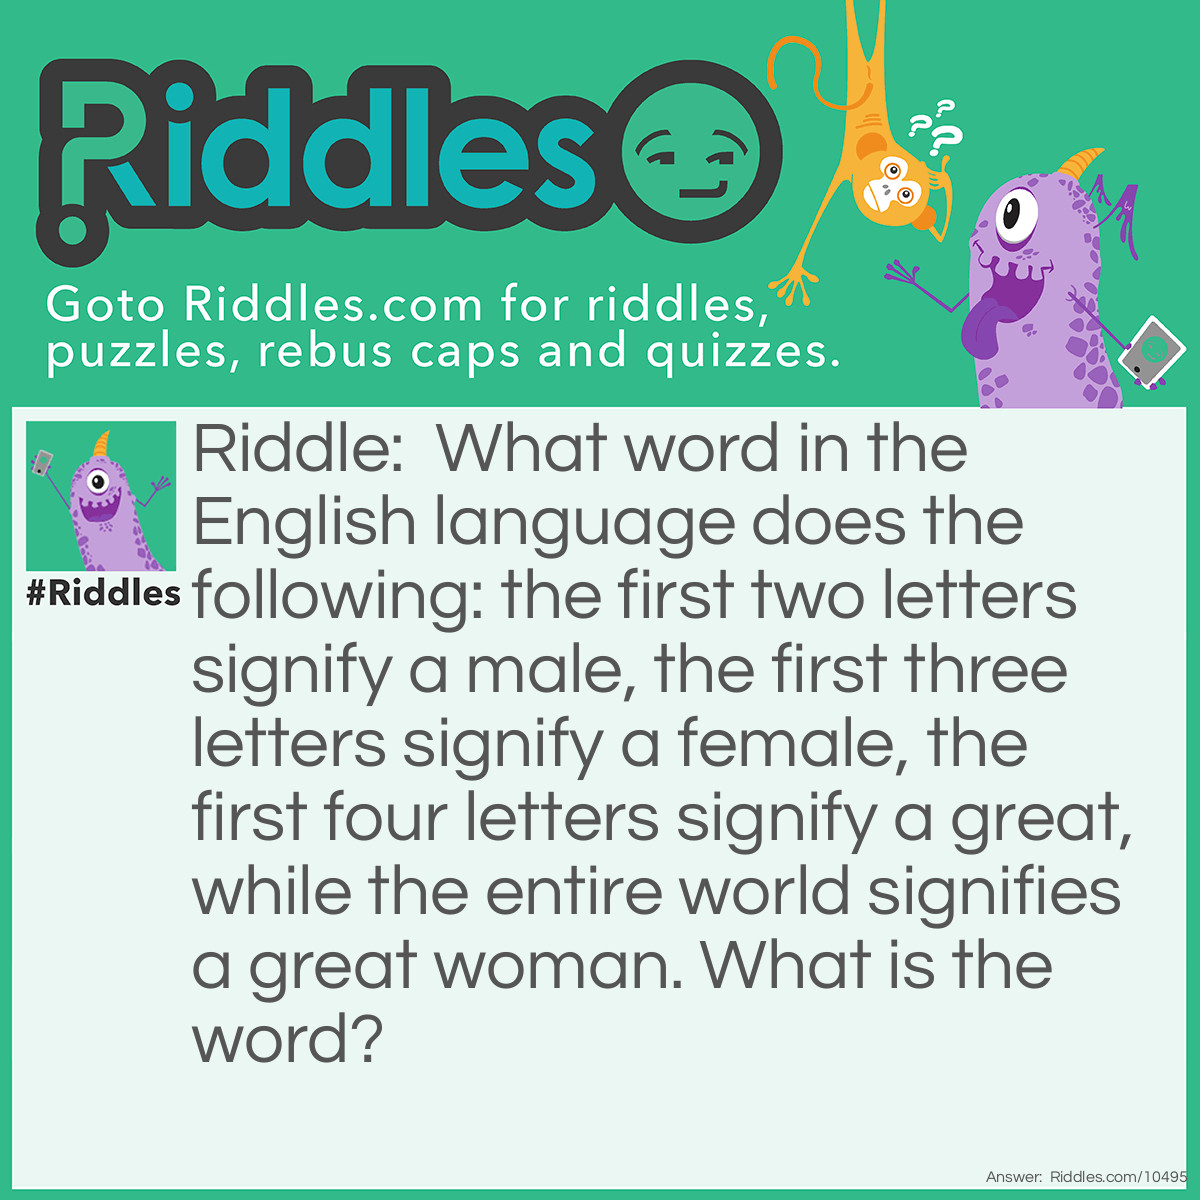 Riddle: What word in the English language does the following: the first two letters signify a male, the first three letters signify a female, the first four letters signify a great, while the entire world signifies a great woman. What is the word? Answer: Heroine.